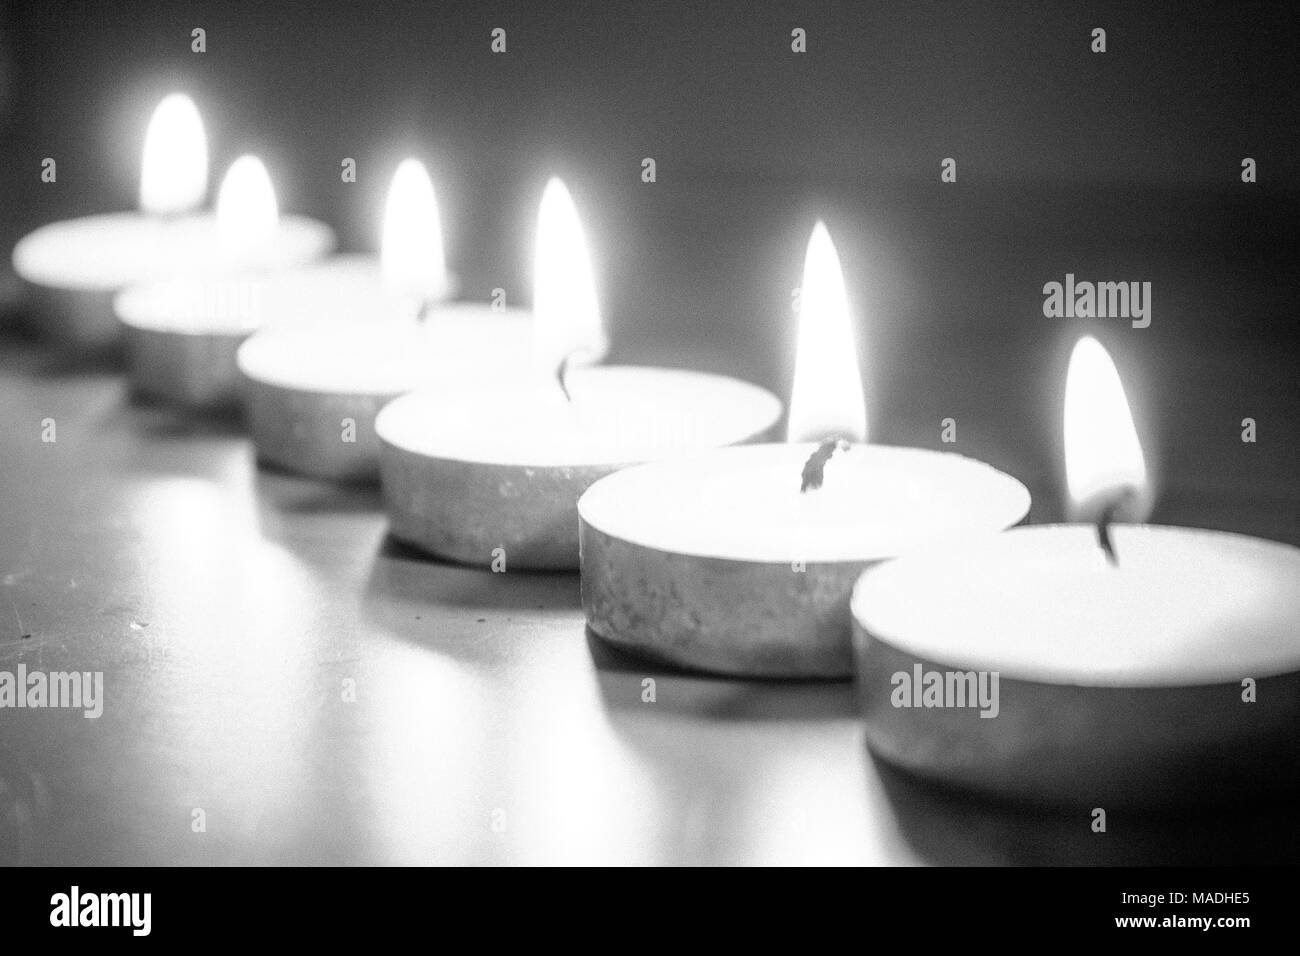 Candle flame perspective Black and White Stock Photos & Images - Alamy